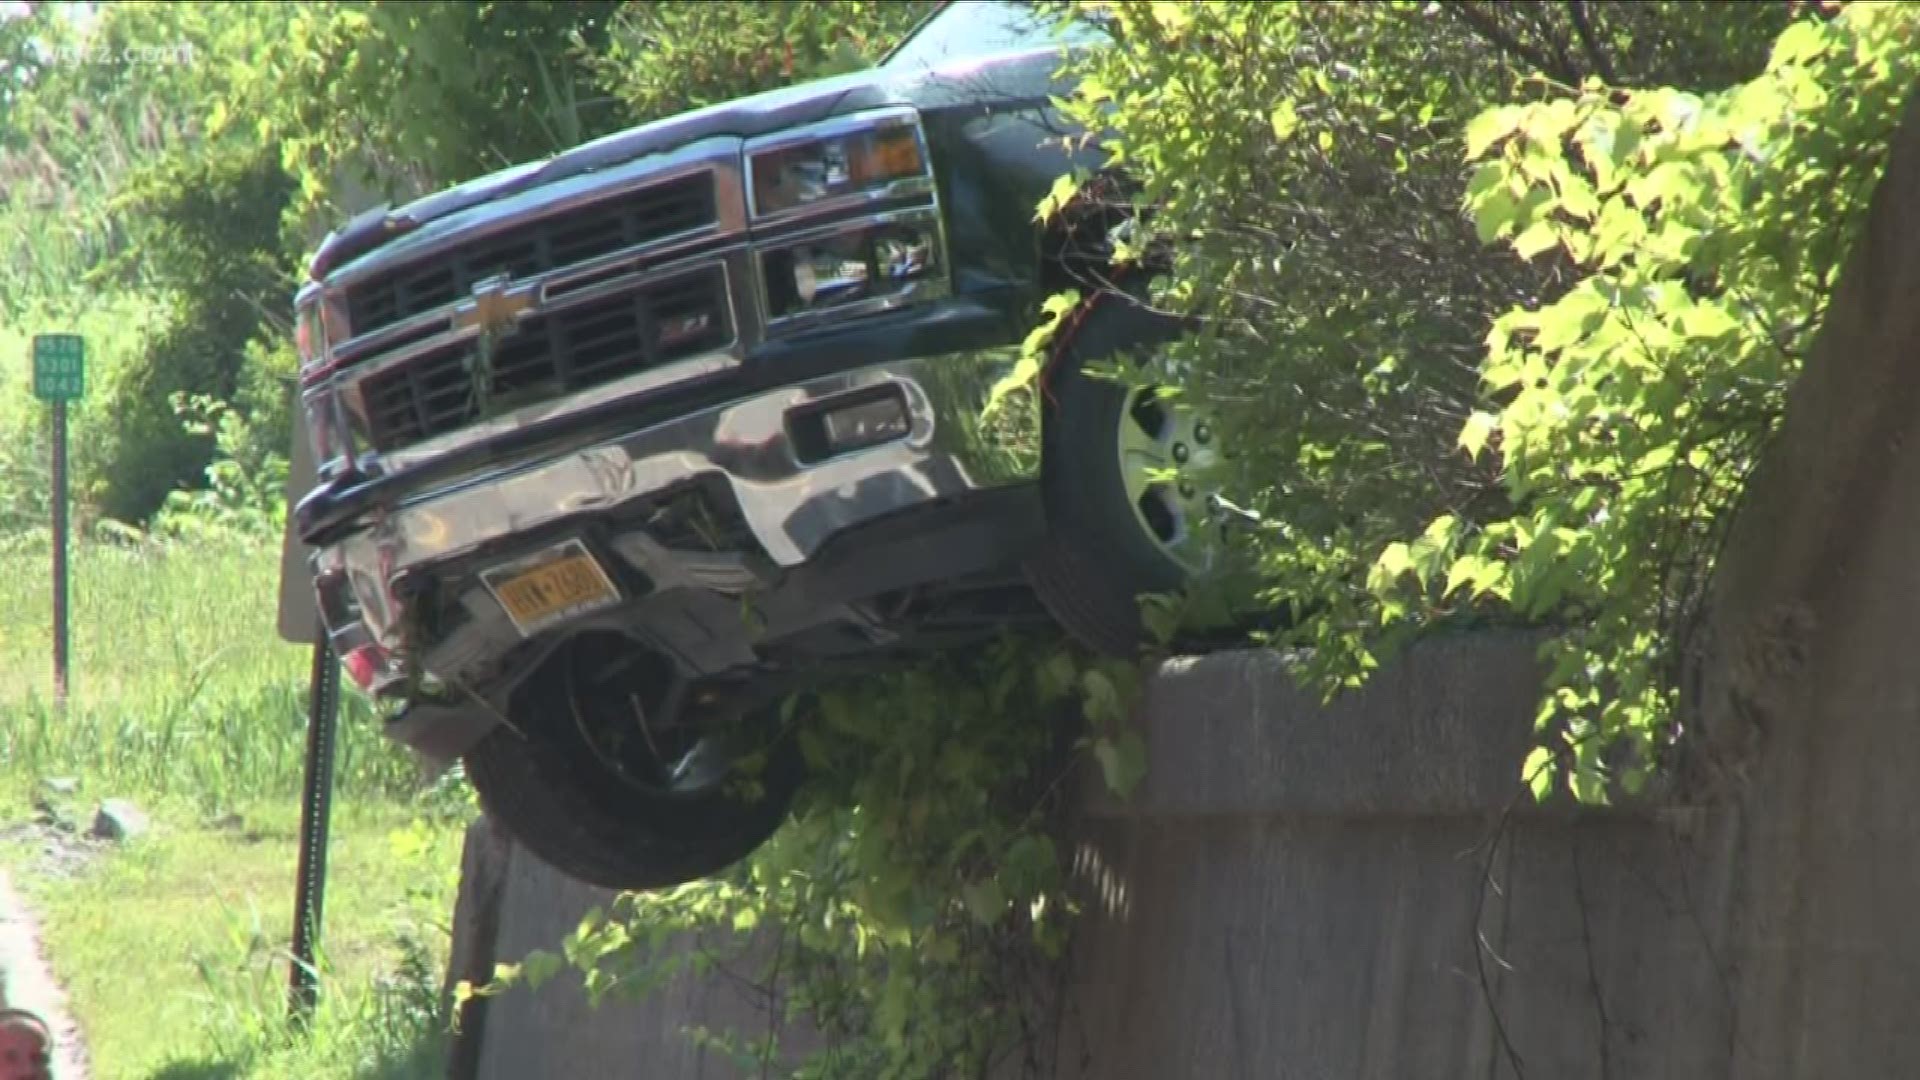 Traffic was backed up in Depew earlier this afternoon for this. A pickup truck hanging off an overpass was on Walden Avenue near Dick Road.